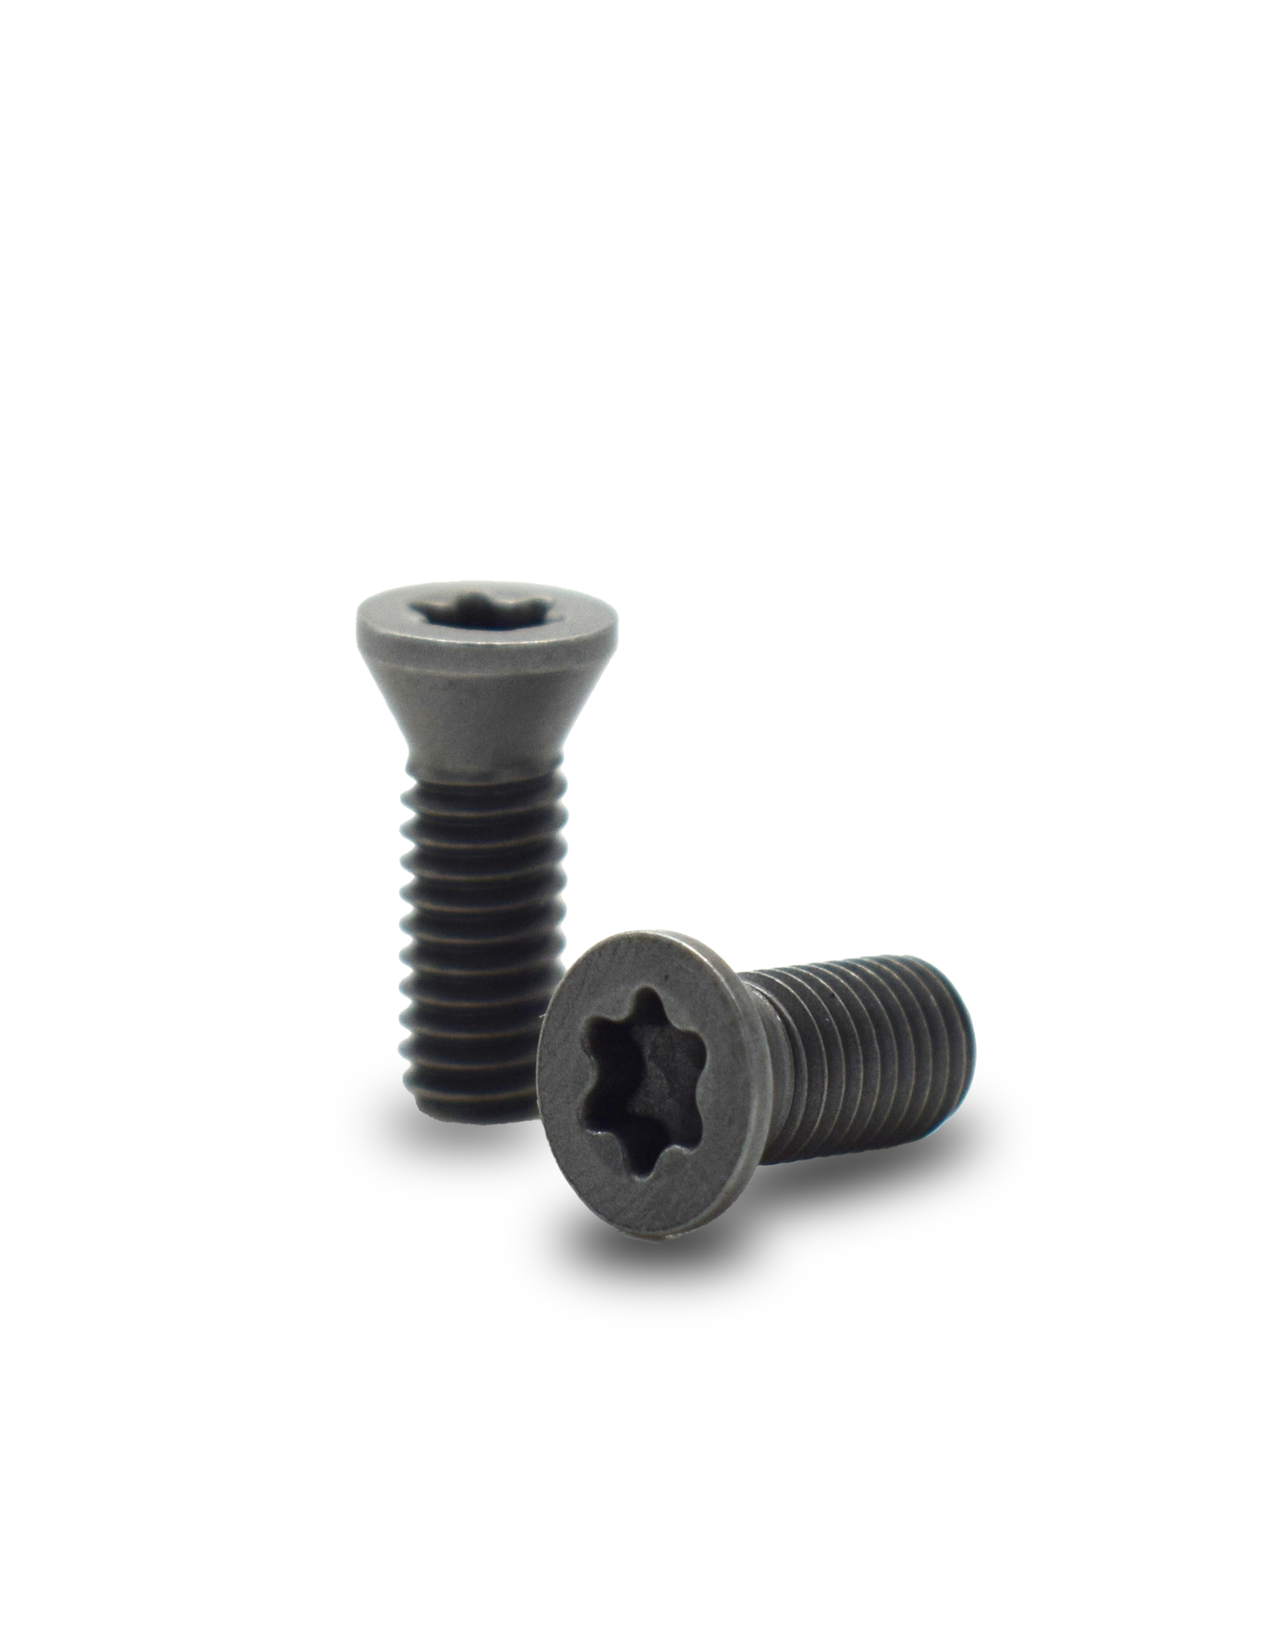 Ultra Precision Screw 4.5mm x 12 mm long Pack of 10 nos.